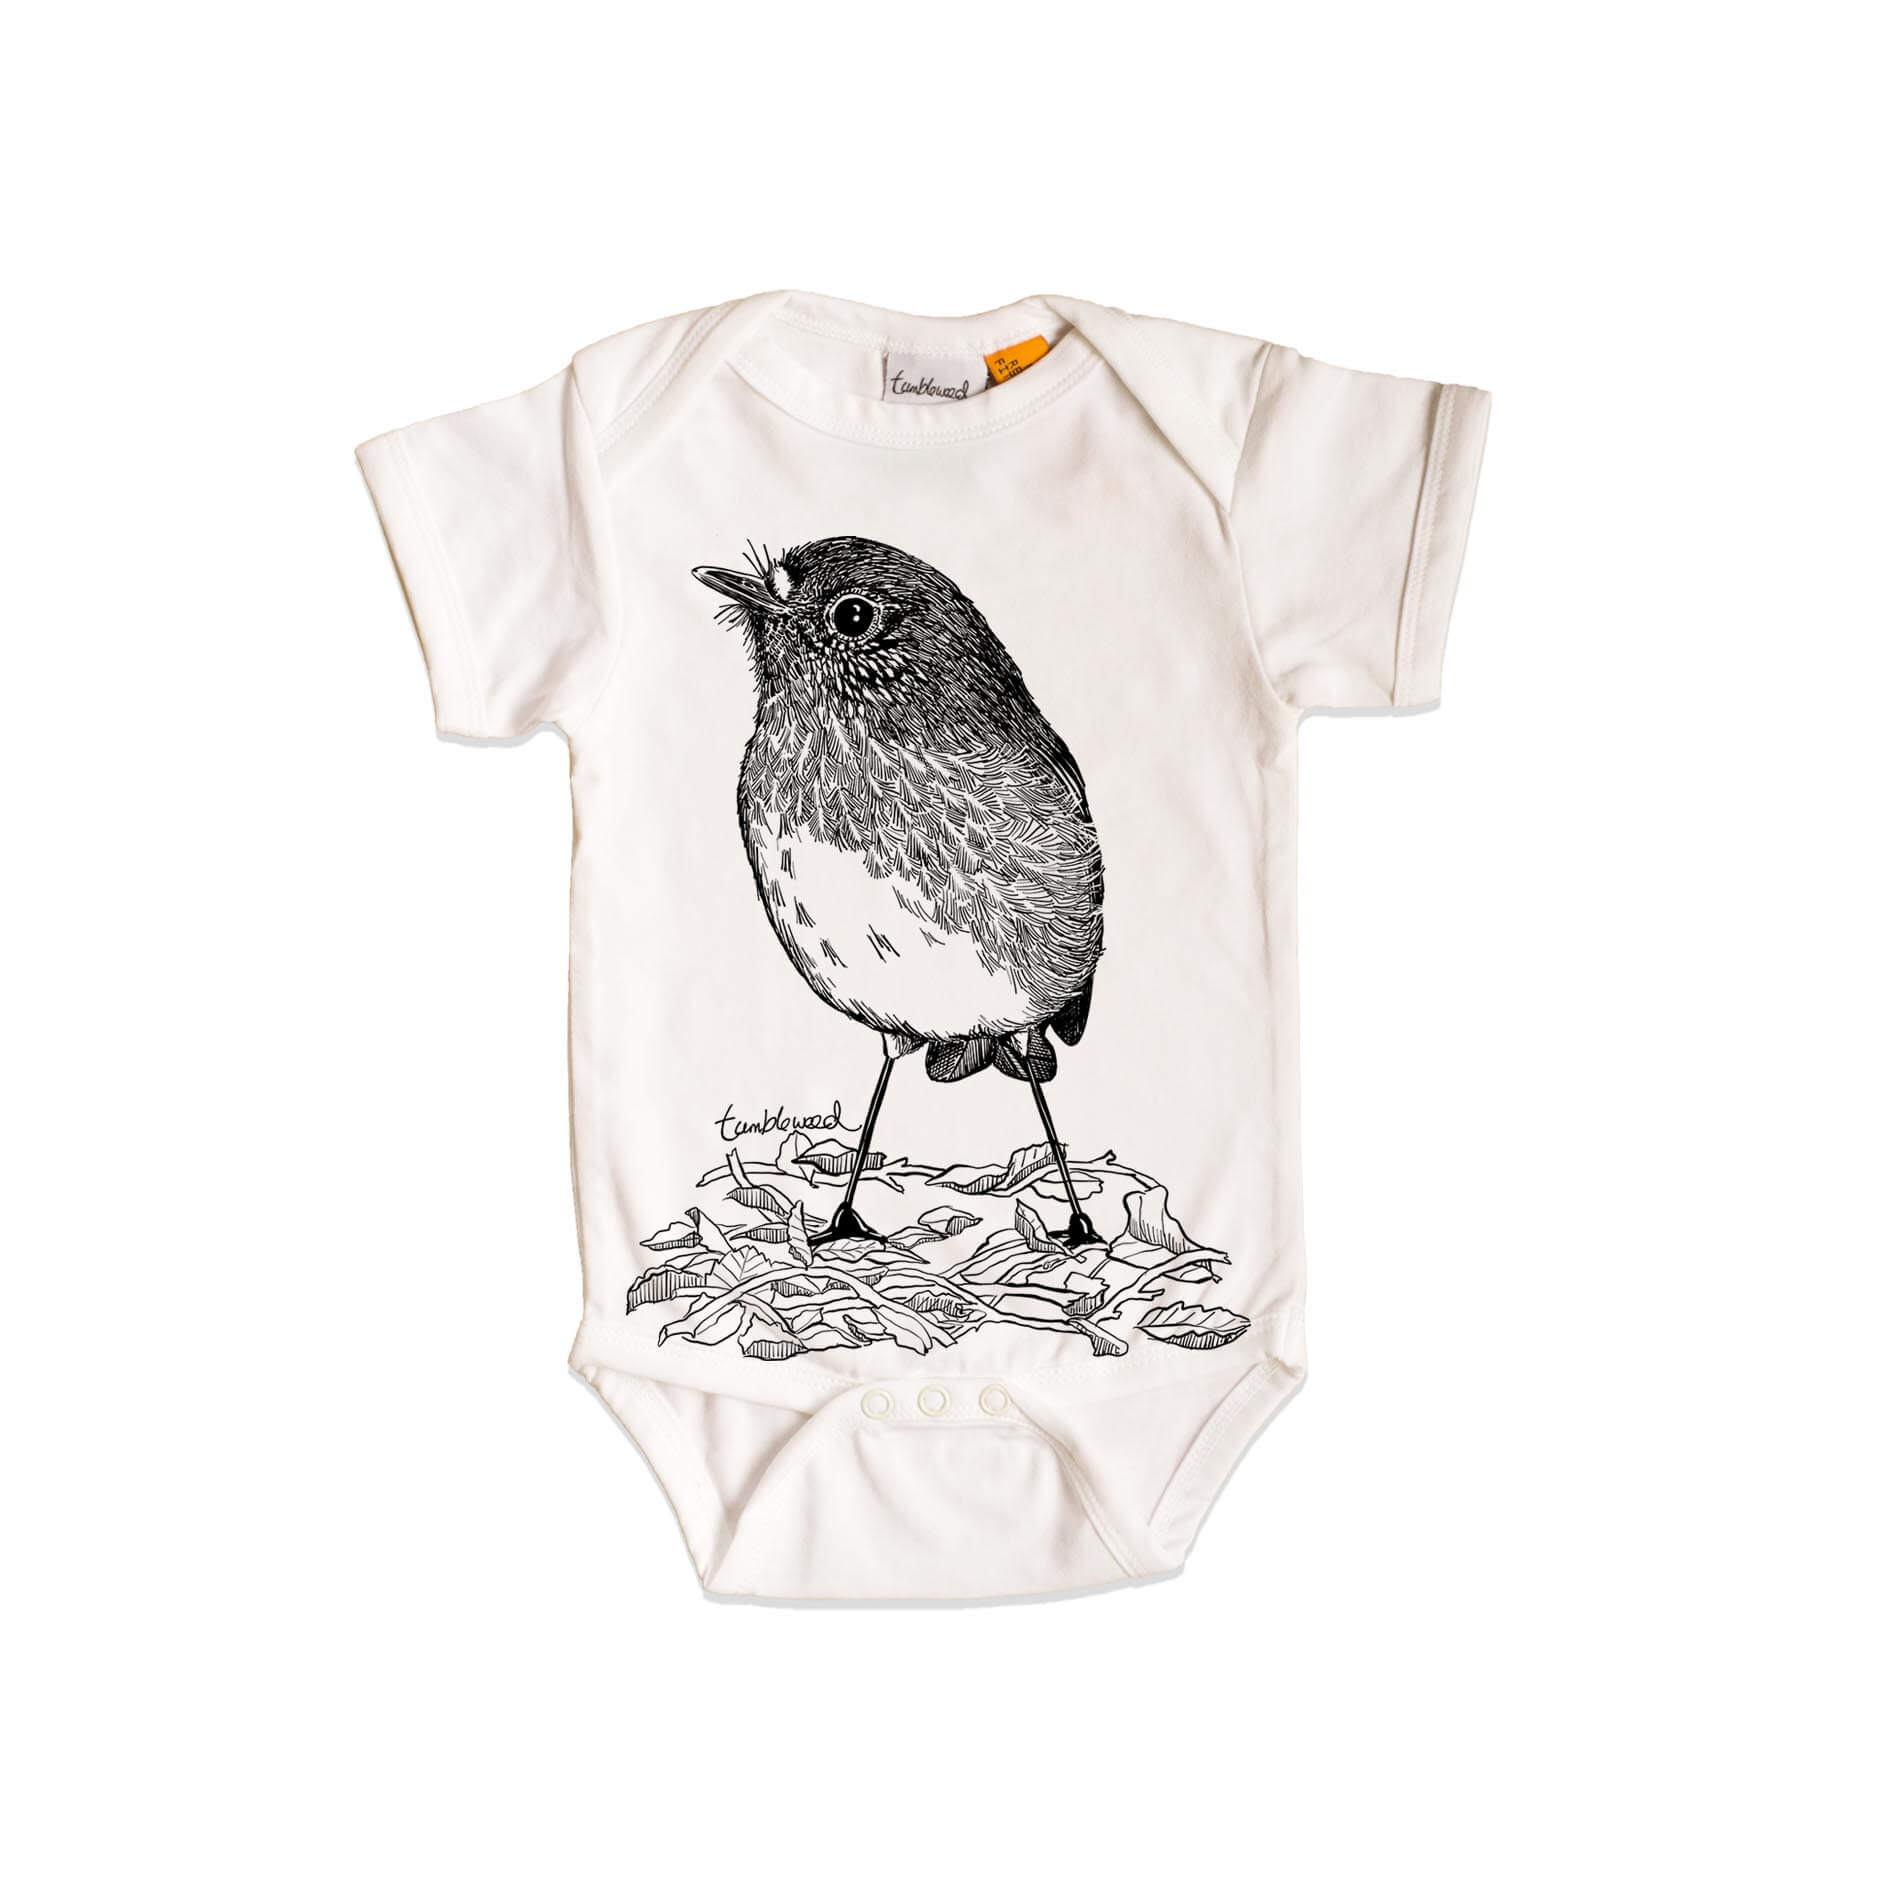 Short sleeved, white, organic cotton, baby onesie featuring a screen printed North Island Robin design.